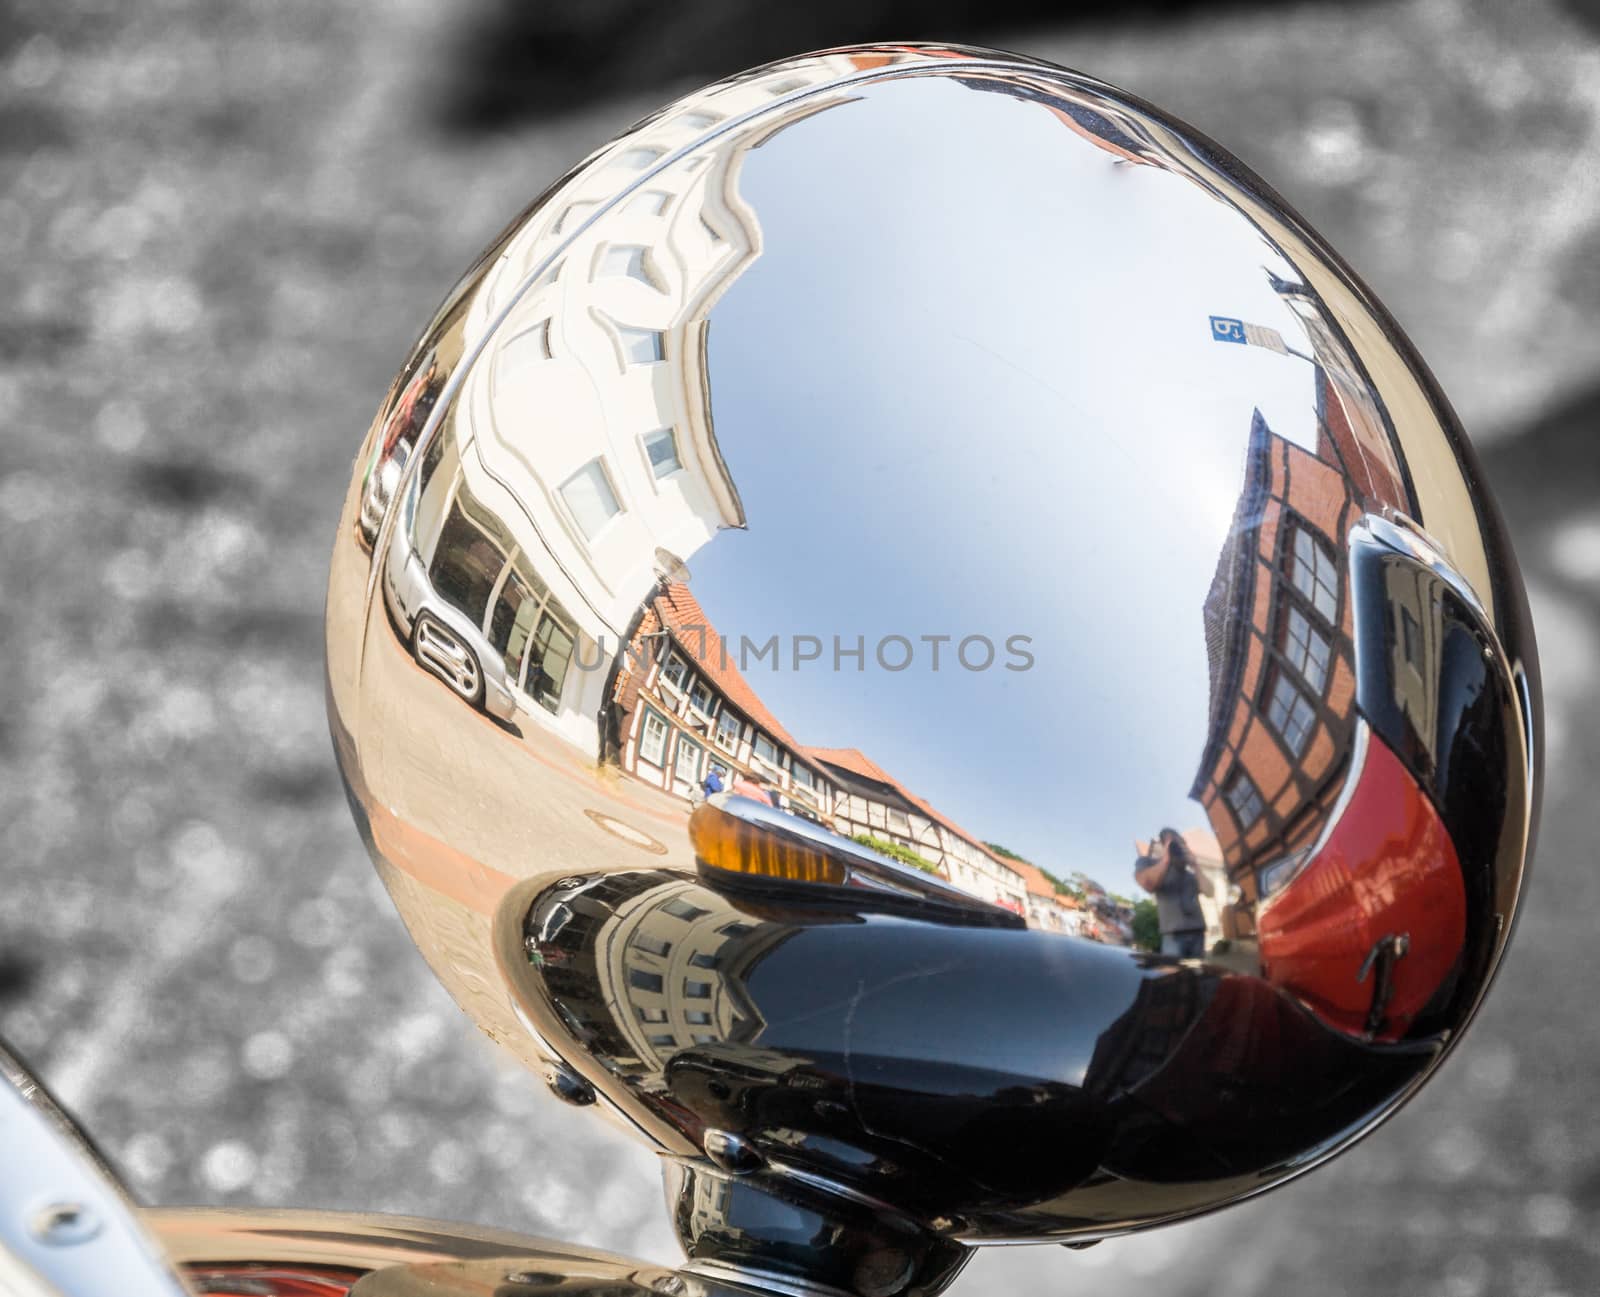 Detailed view from the back of a reflecting headlight on a historic vehicle at a vintage car festival, Germany